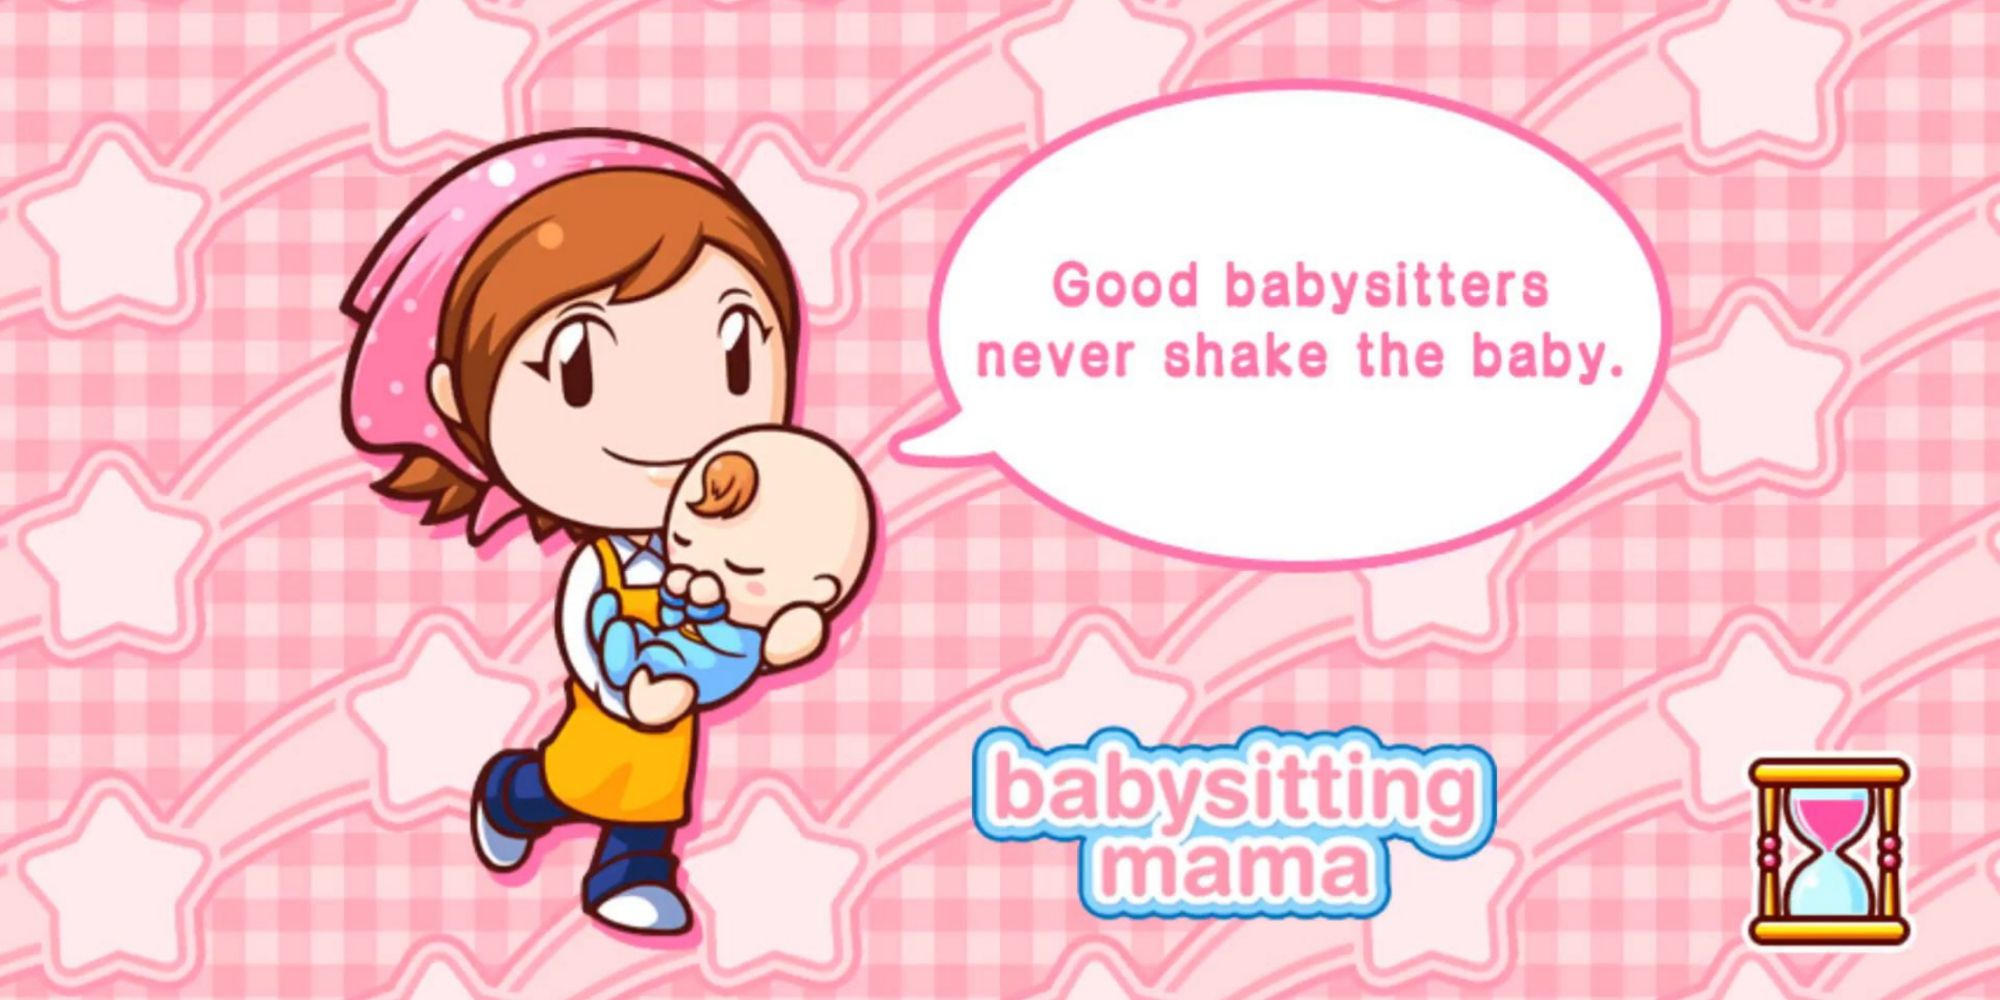 Mama holds a sleeping baby and says "Good babysitters never shake the baby"